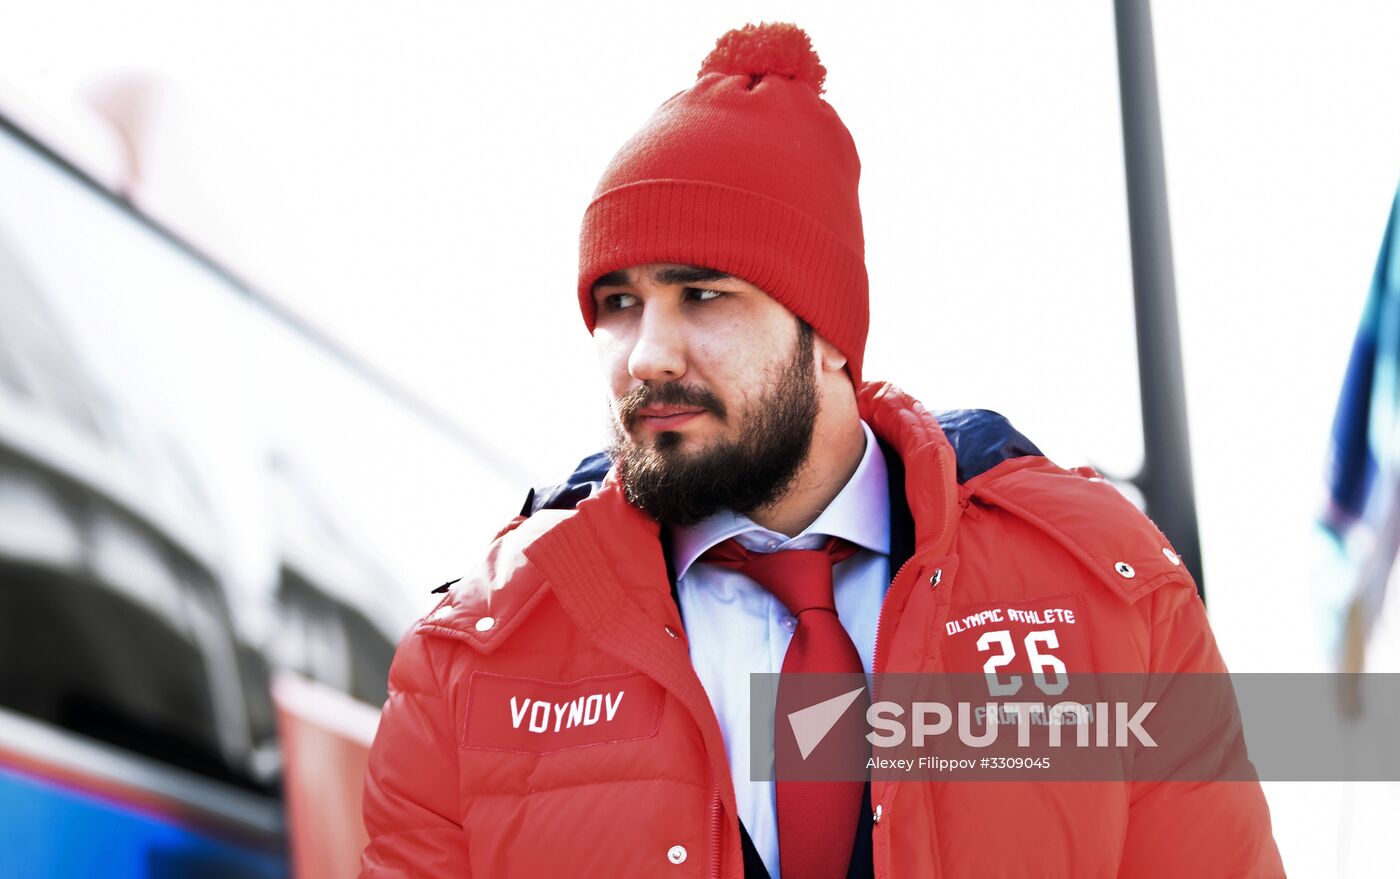 2018 Winter Olympics. Russian hockey players come to play final match